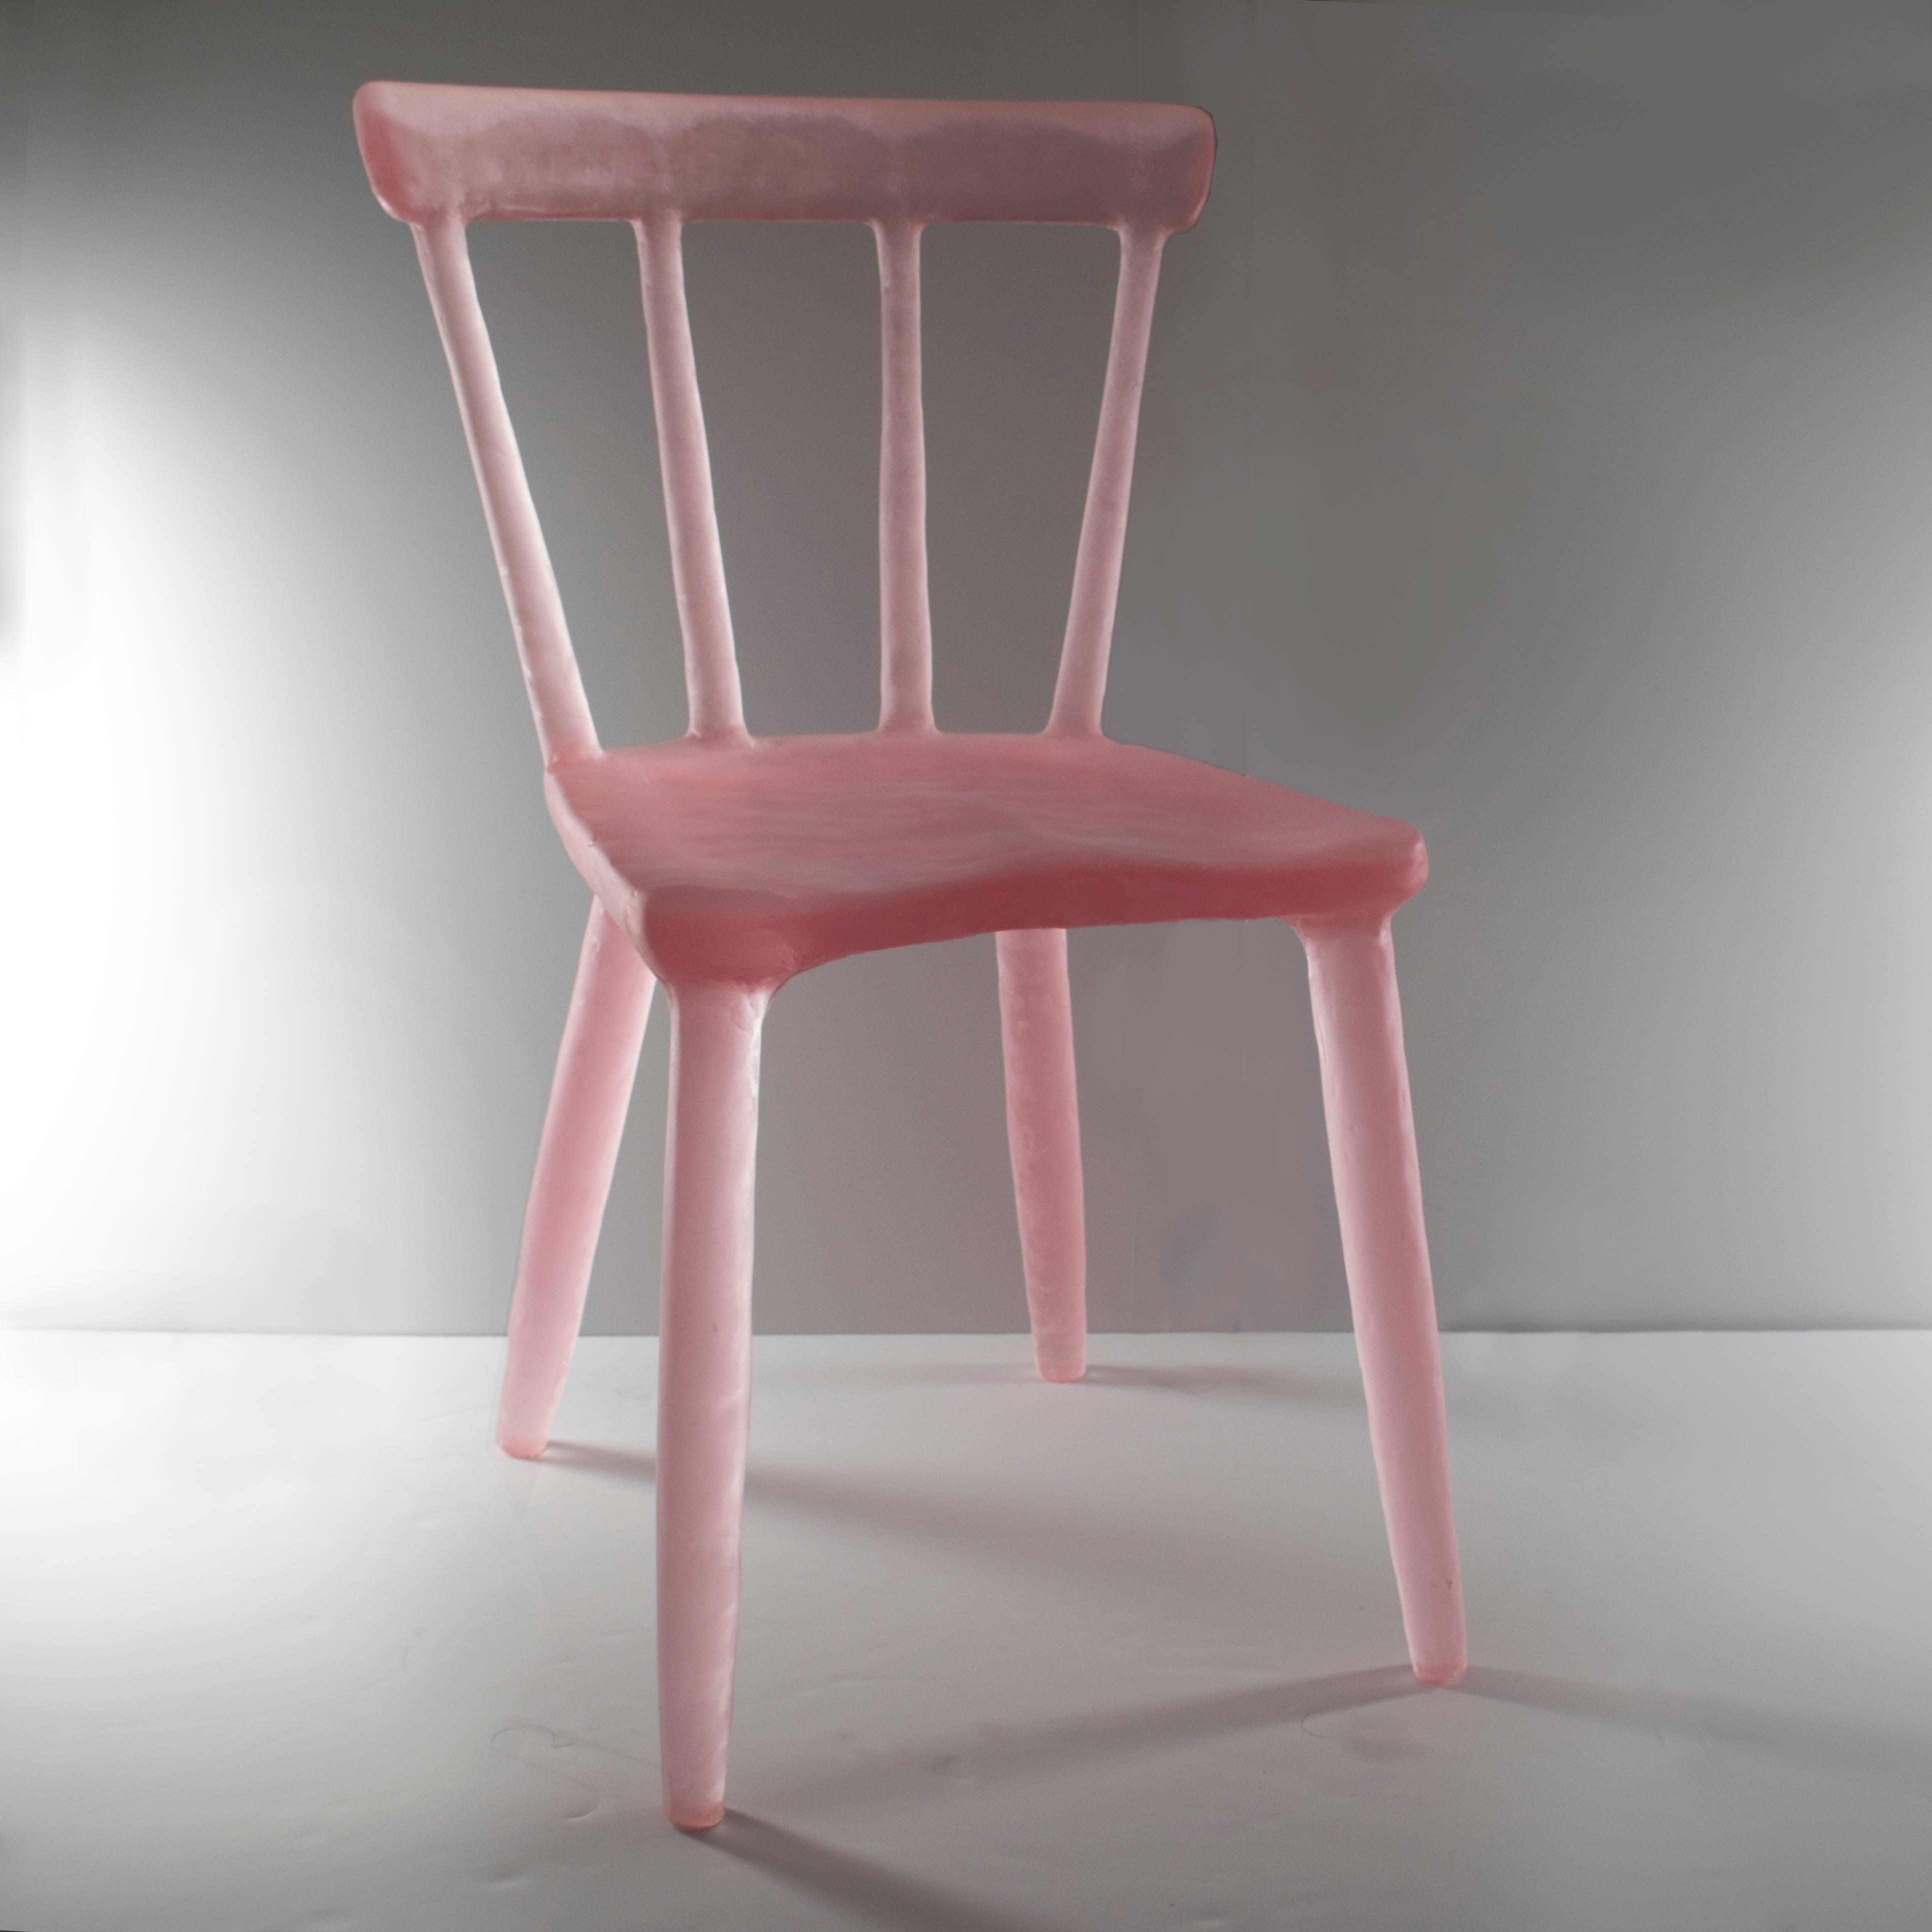 Glow Chair by Kim Markel in Pink, Handmade from Cast Recycled Resin / Acrylic In Excellent Condition For Sale In Beacon, NY